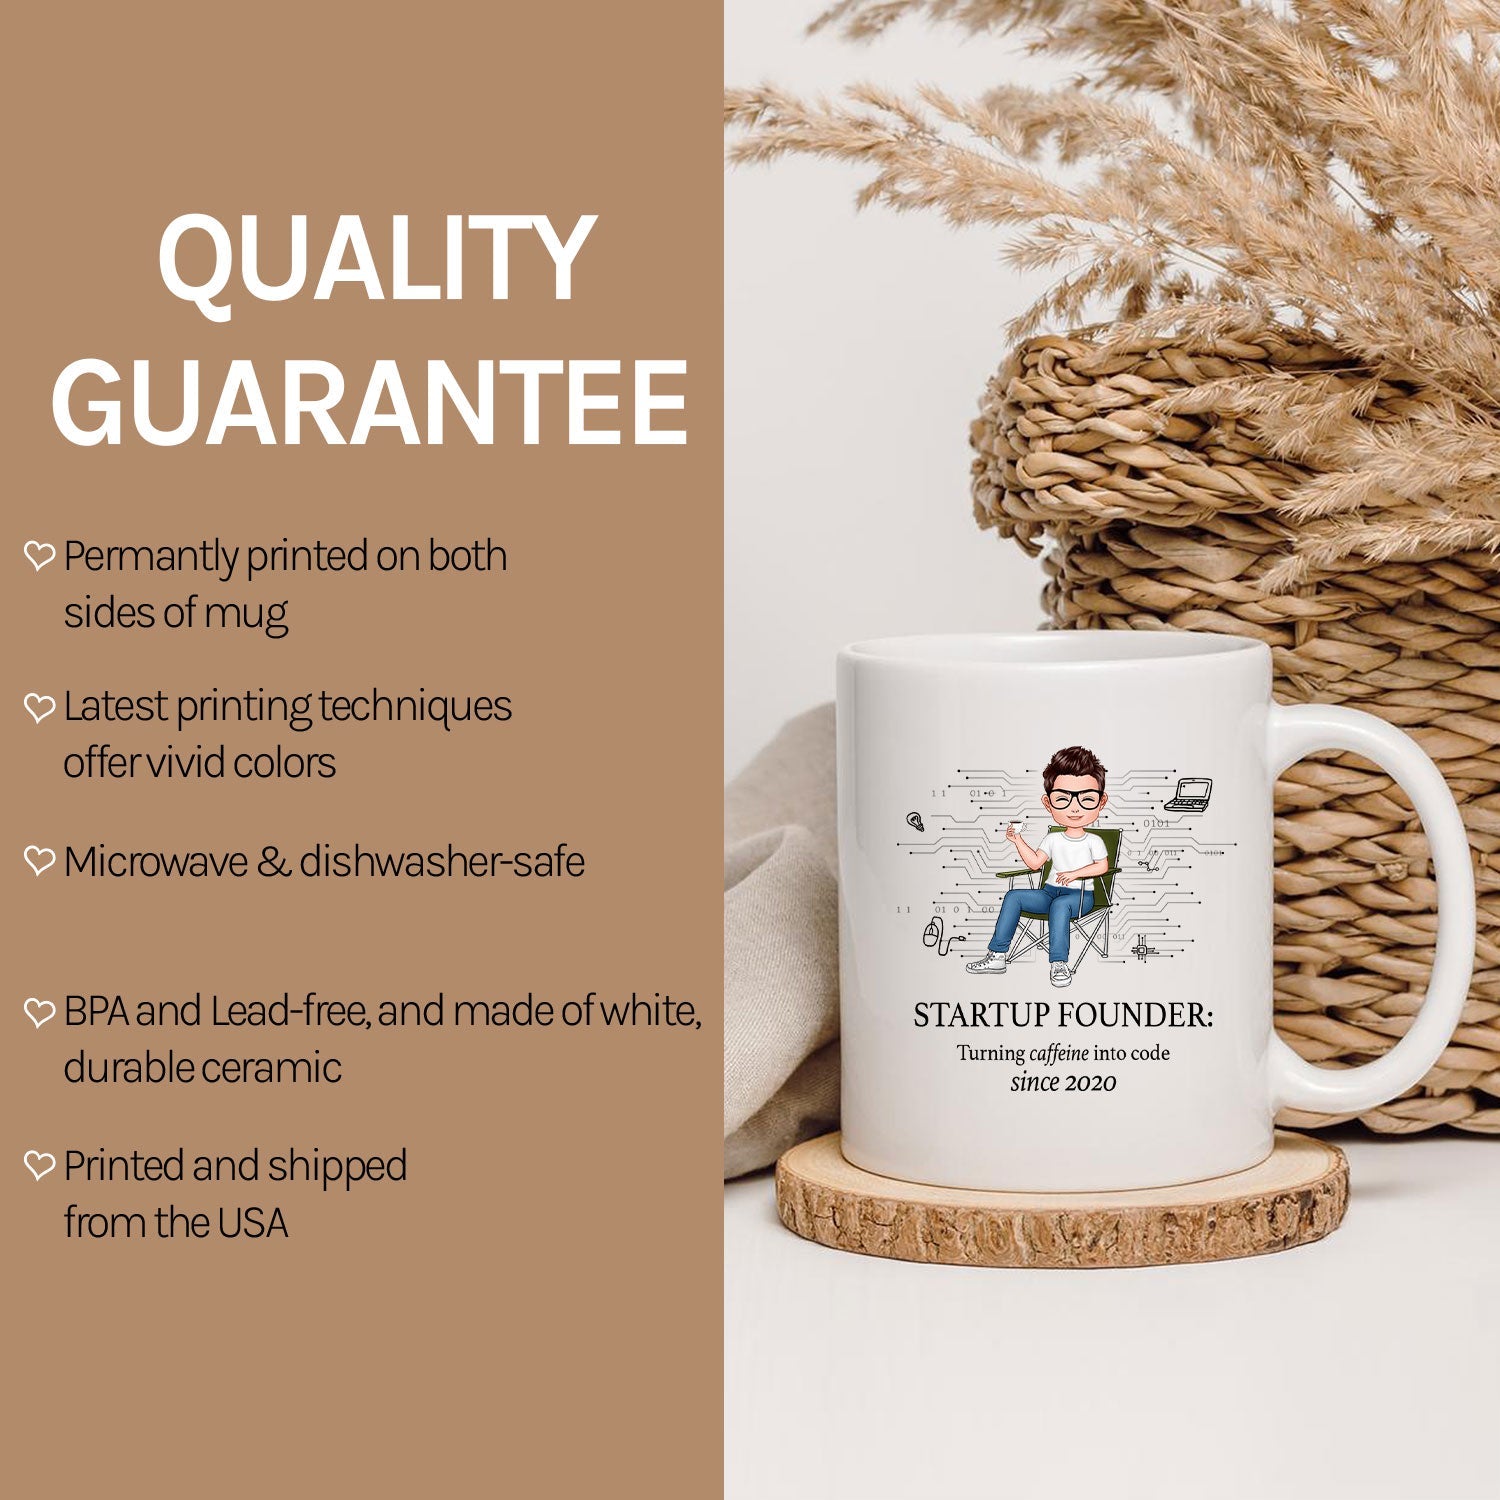 Startup founder: Turning caffeine into code since 2020 - Personalized Birthday gift for Startup Founder - Custom Mug - MyMindfulGifts